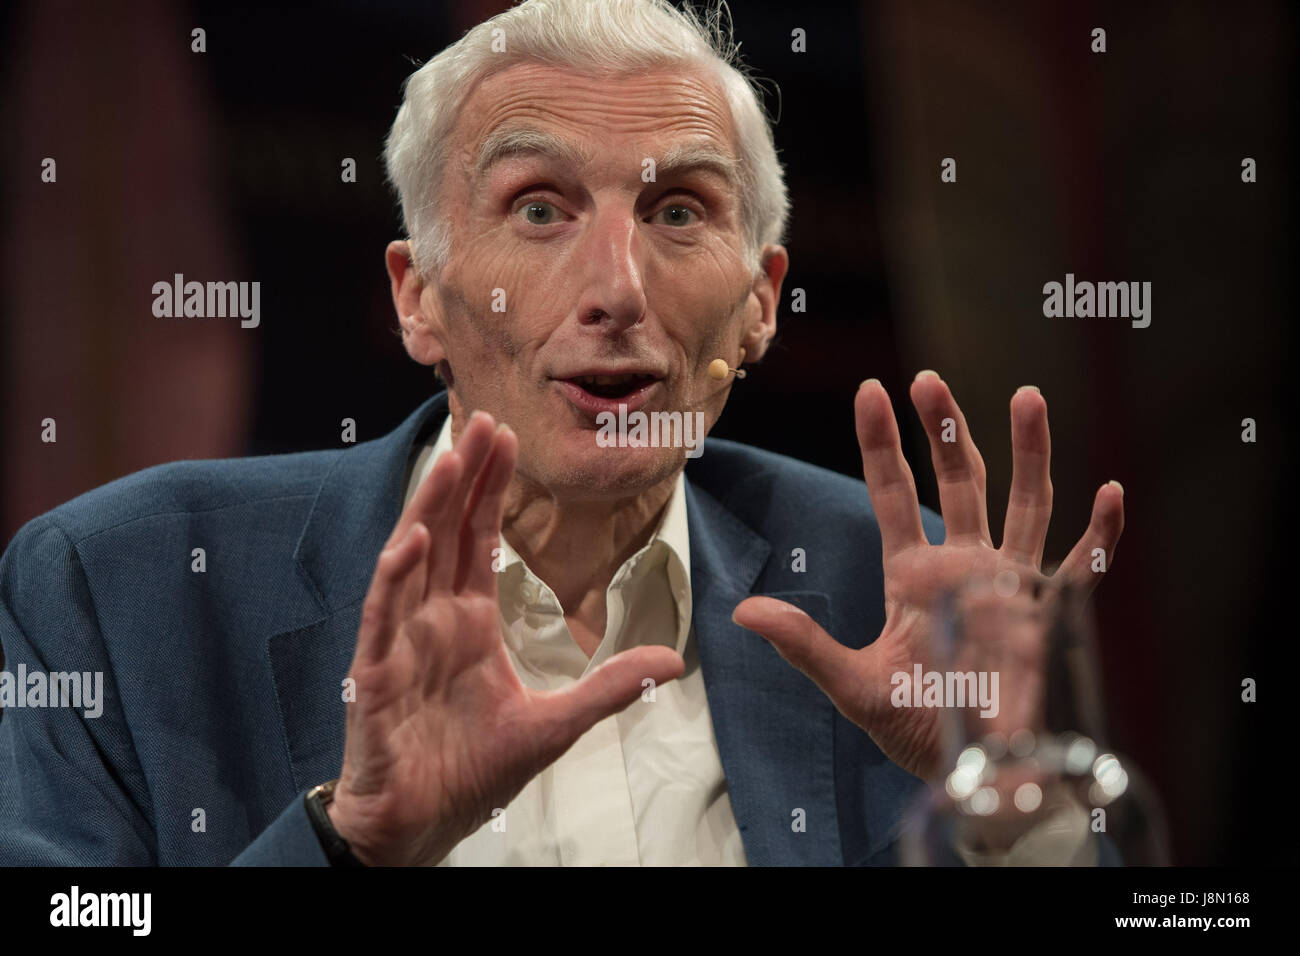 Hay Festival, Wales UK, Monday 29 May 2017 Cosmologist and astrophysicist, MARTIN REES speaking animatedly onstage at the 2017 Hay Festival. Now in its 30th year, the festival draws tens of thousand of visitors a day to what was described by former US president Bill Clinton as 'the woodstock of the mind' Photo credit Credit: keith morris/Alamy Live News Stock Photo